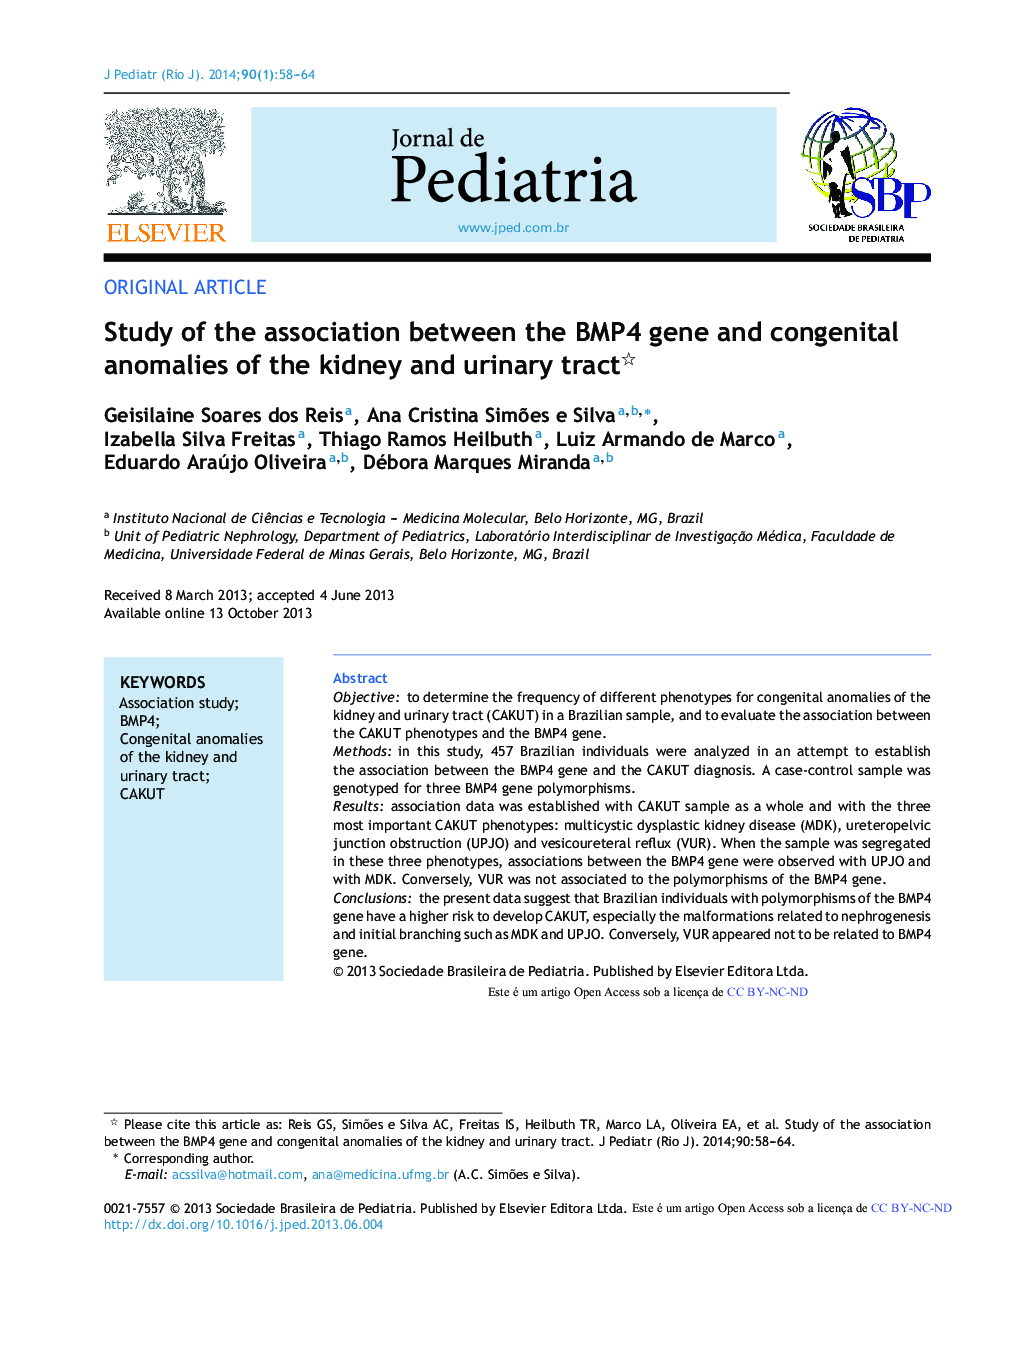 Study of the association between the BMP4 gene and congenital anomalies of the kidney and urinary tract 